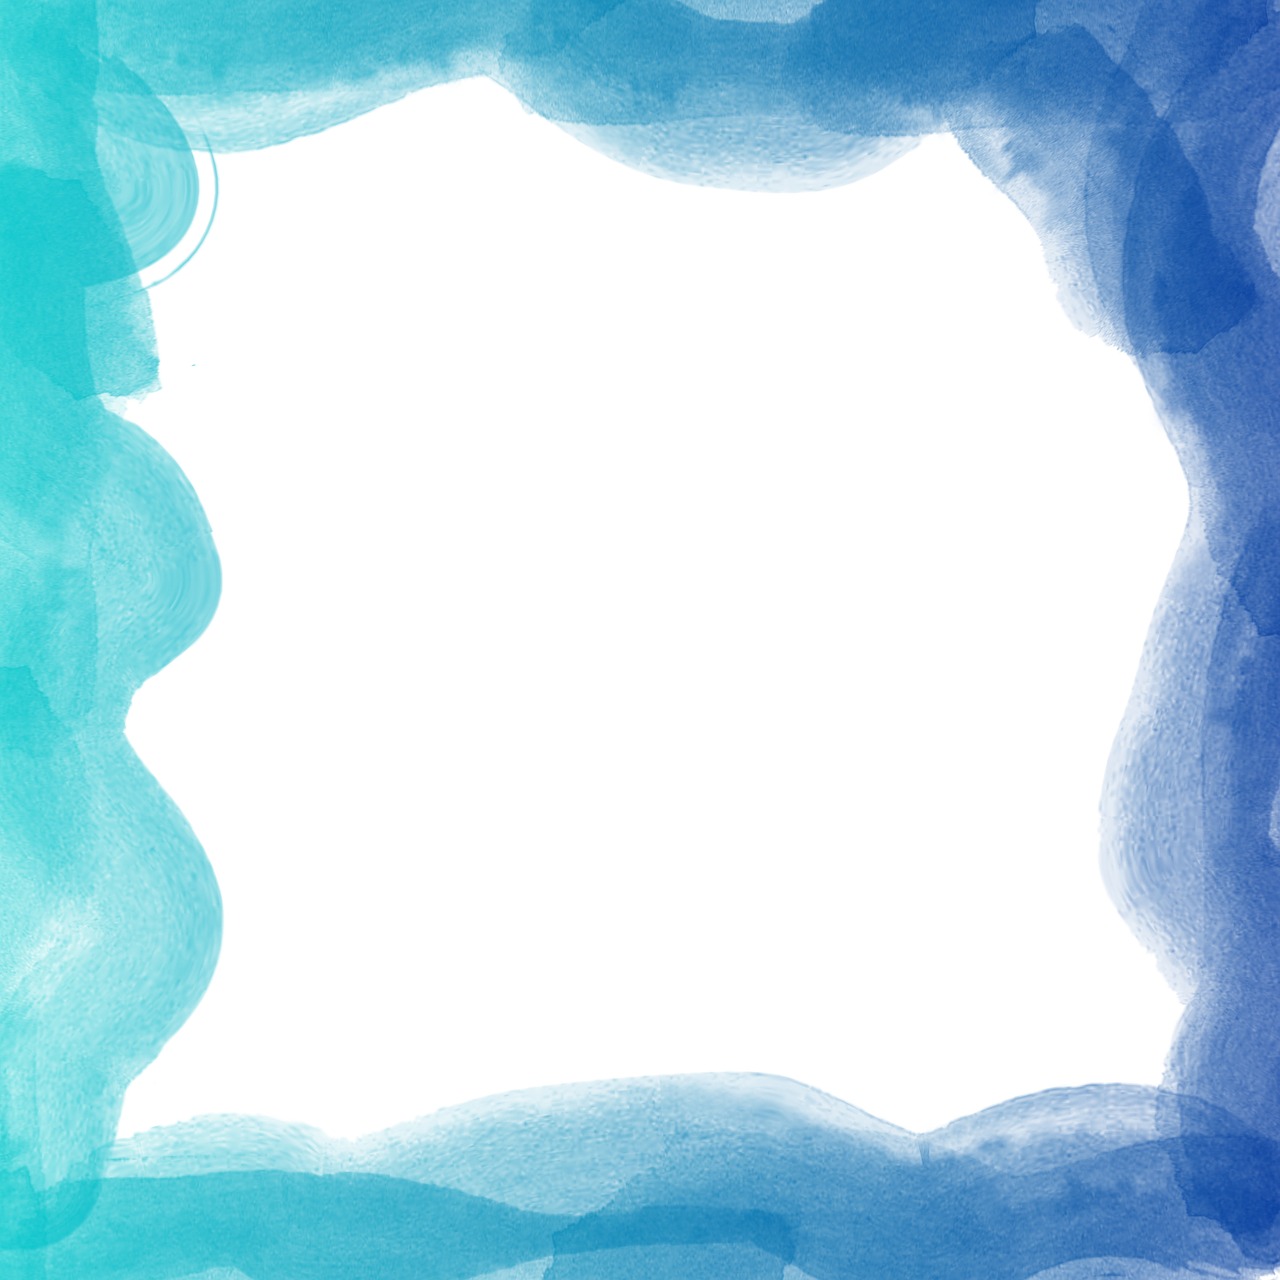 Download free photo of Watercolor,blue,watercolor background,paint,drawing  - from 